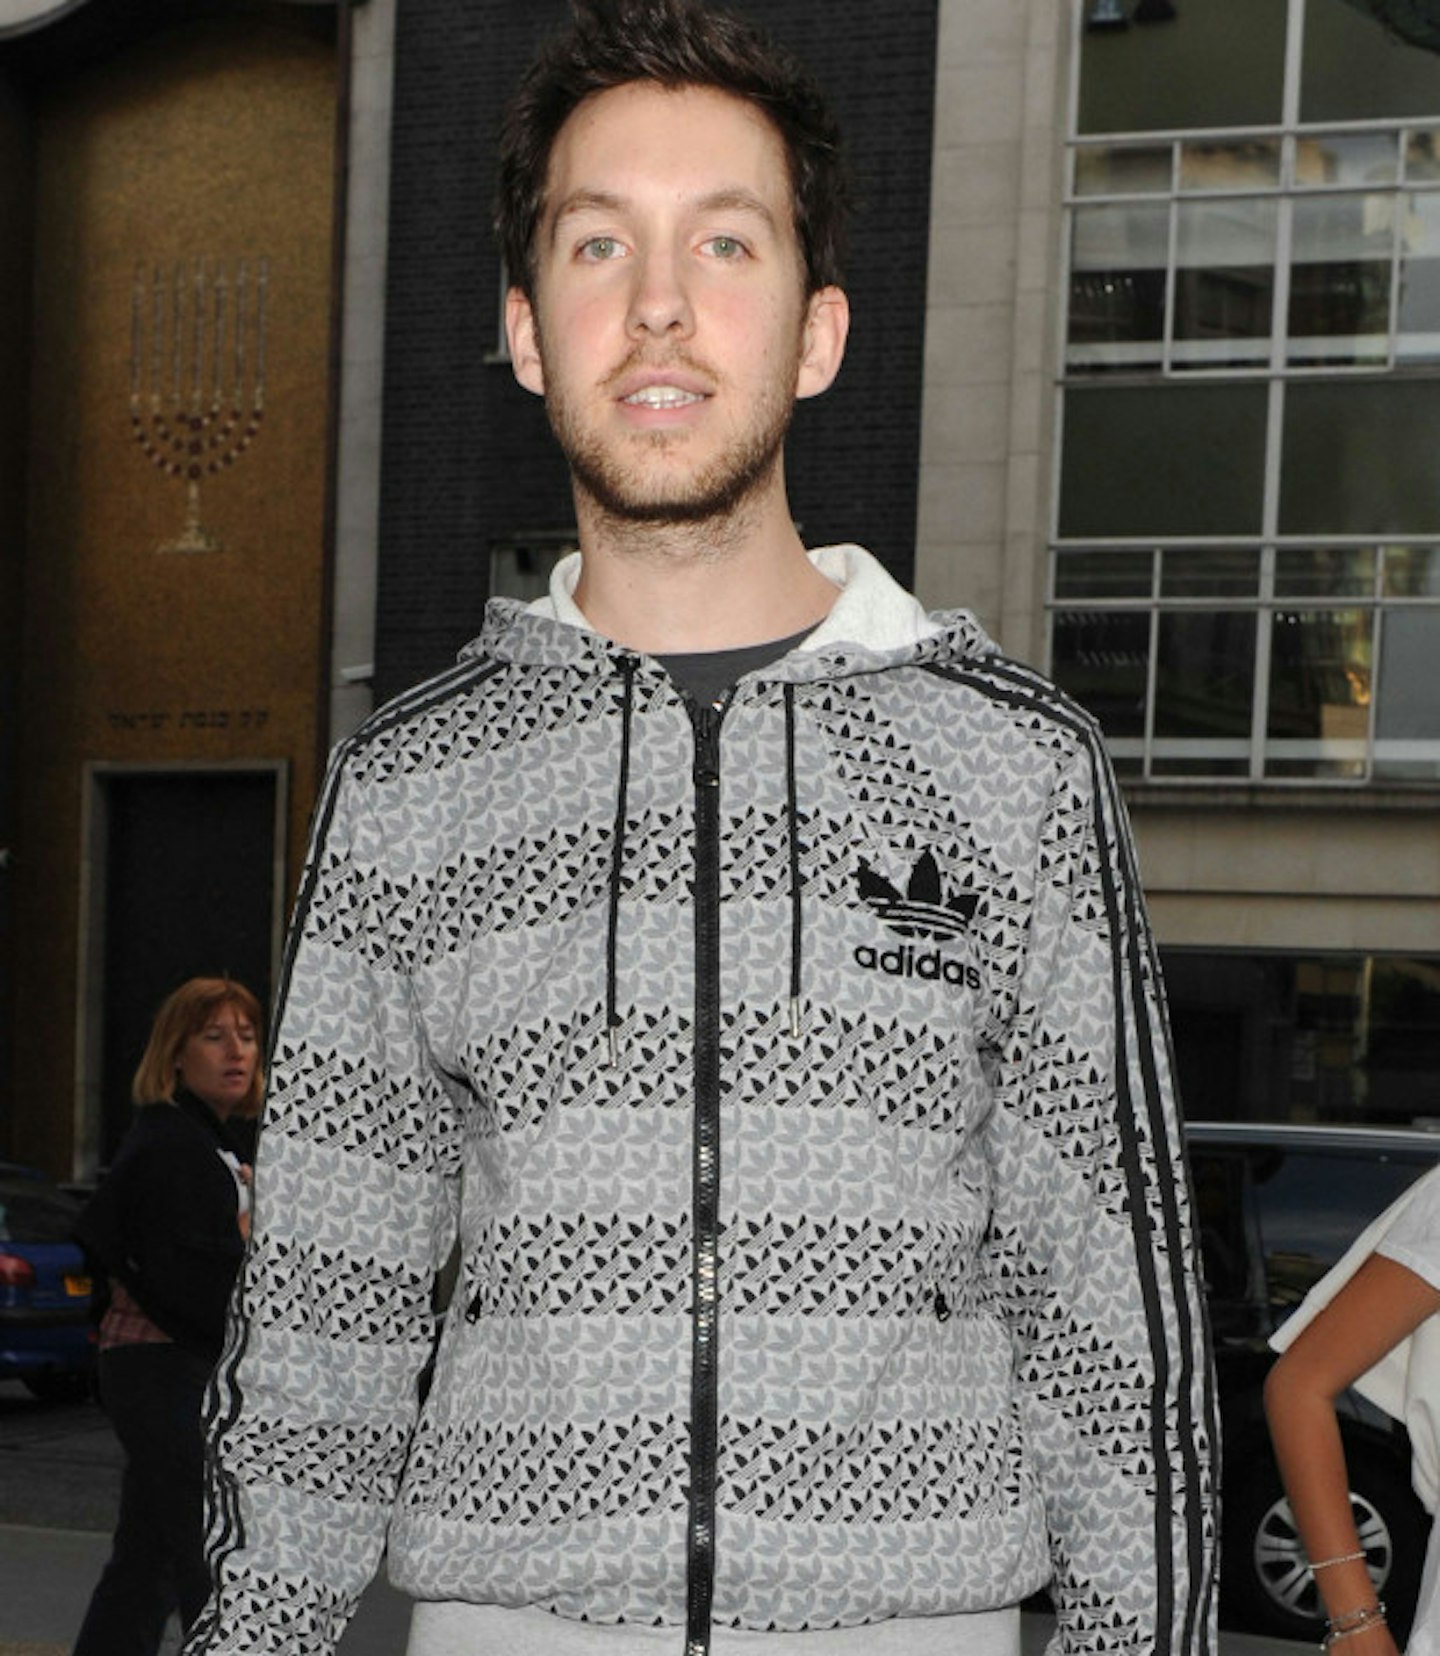 Before expensive hair cuts, Calvin matched his Adidas hoodie with a gentle layering of stubble